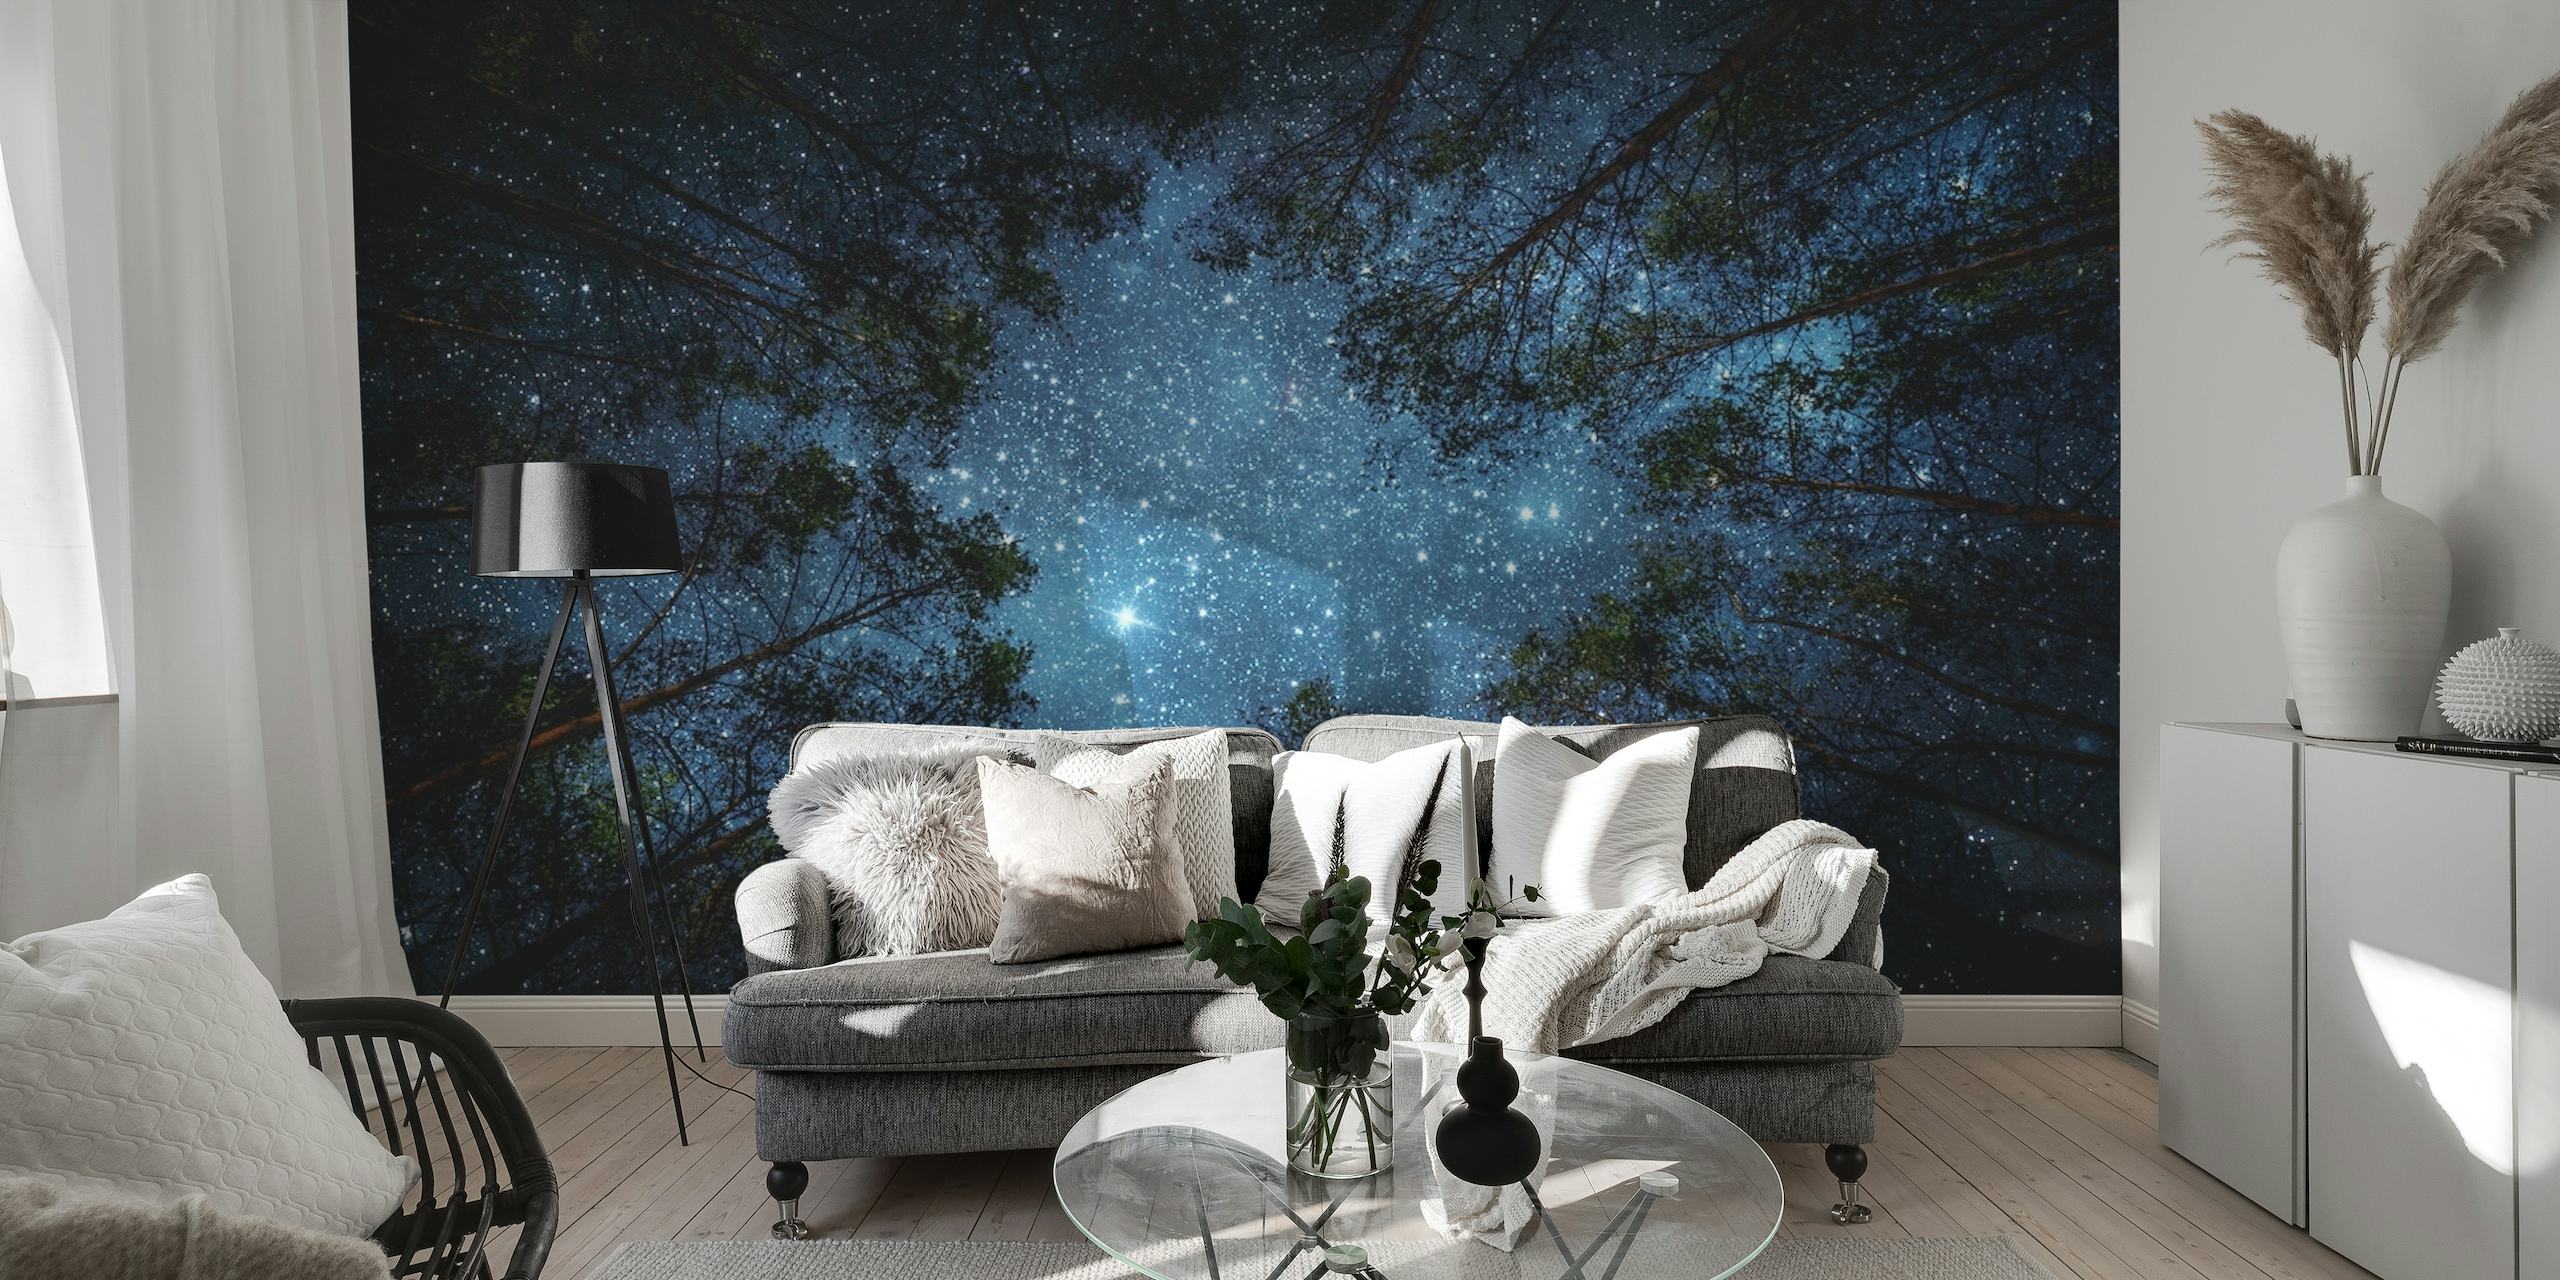 Night Sky Wallpaper Mural featuring star constellations, distant galaxies and twinkling stars